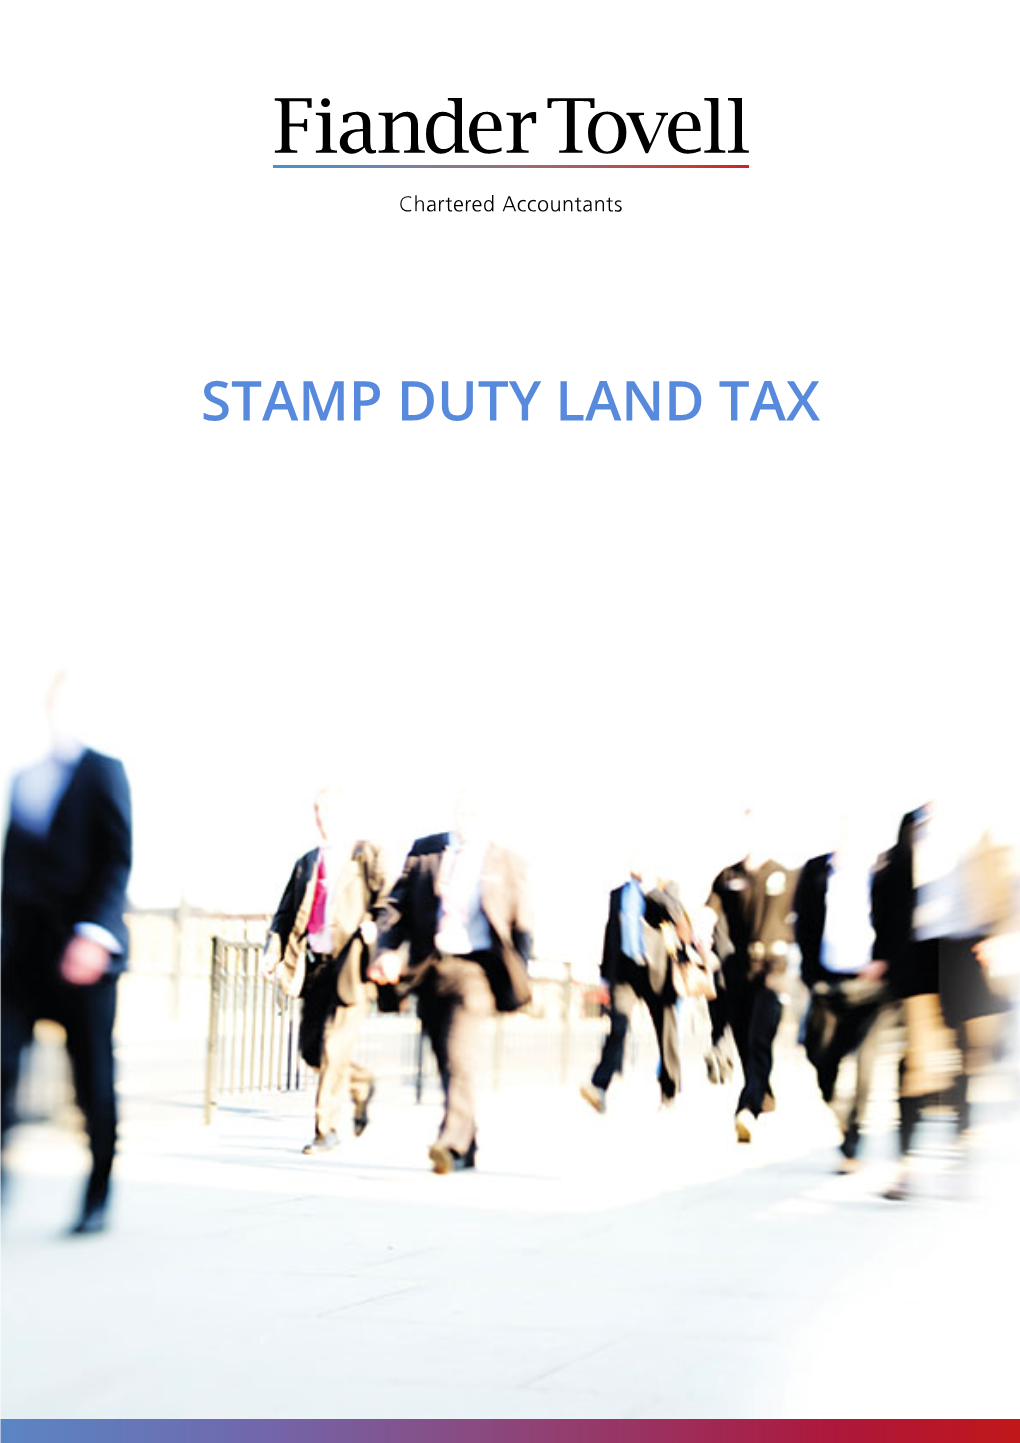 STAMP DUTY LAND TAX Stamp Duty Land Tax